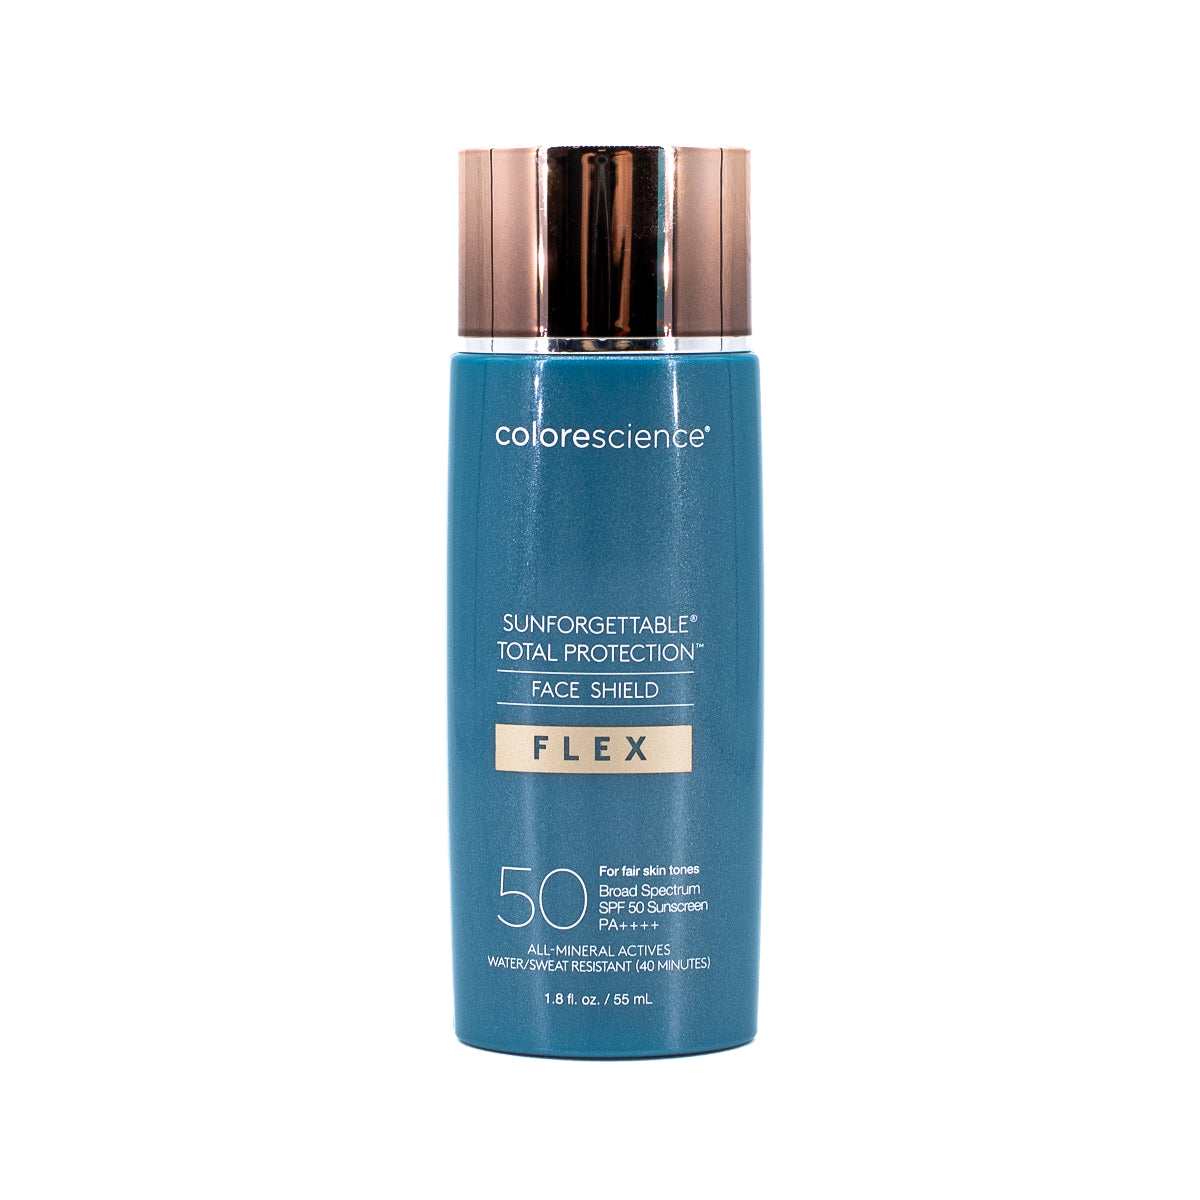 colorescience Sunforgettable Total Protection Face Shield Flex SPF 50 TAN 1.8oz - Small Amount Missing